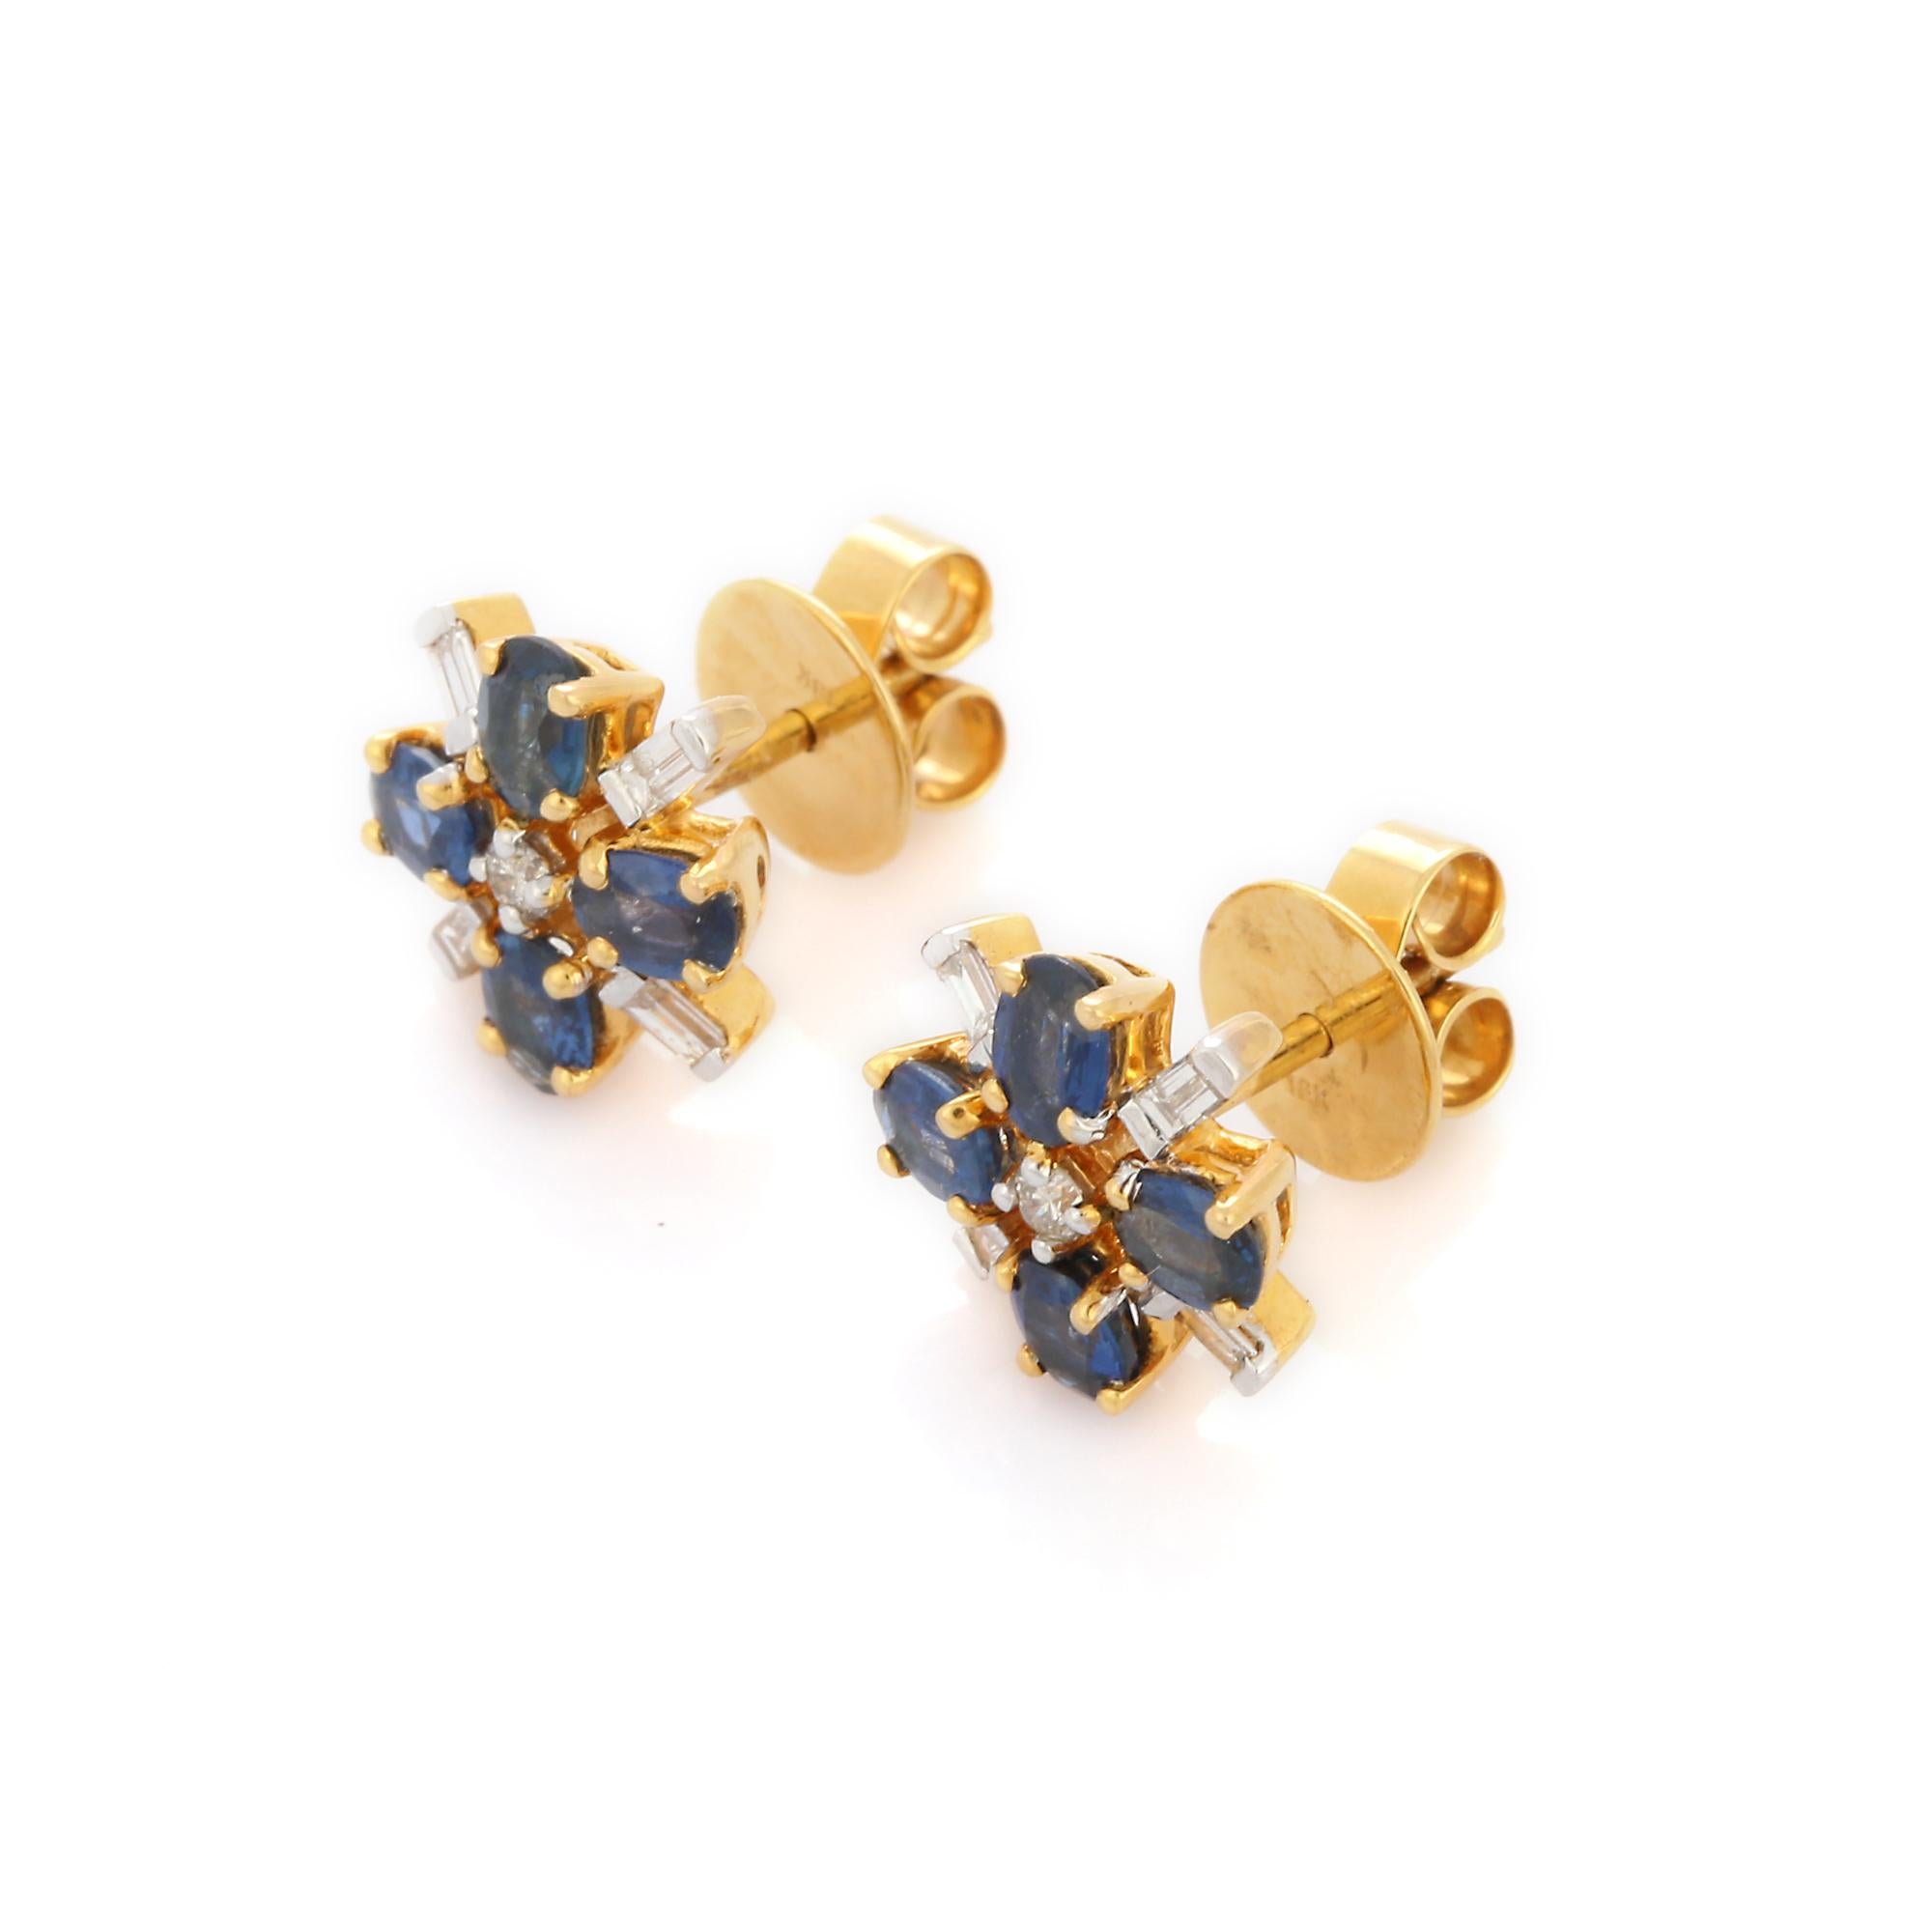 Studs create a subtle beauty while showcasing the colors of the natural precious gemstones and illuminating diamonds making a statement.

Oval cut blue sapphire studs with diamonds in 18K gold. Embrace your look with these stunning pair of earrings